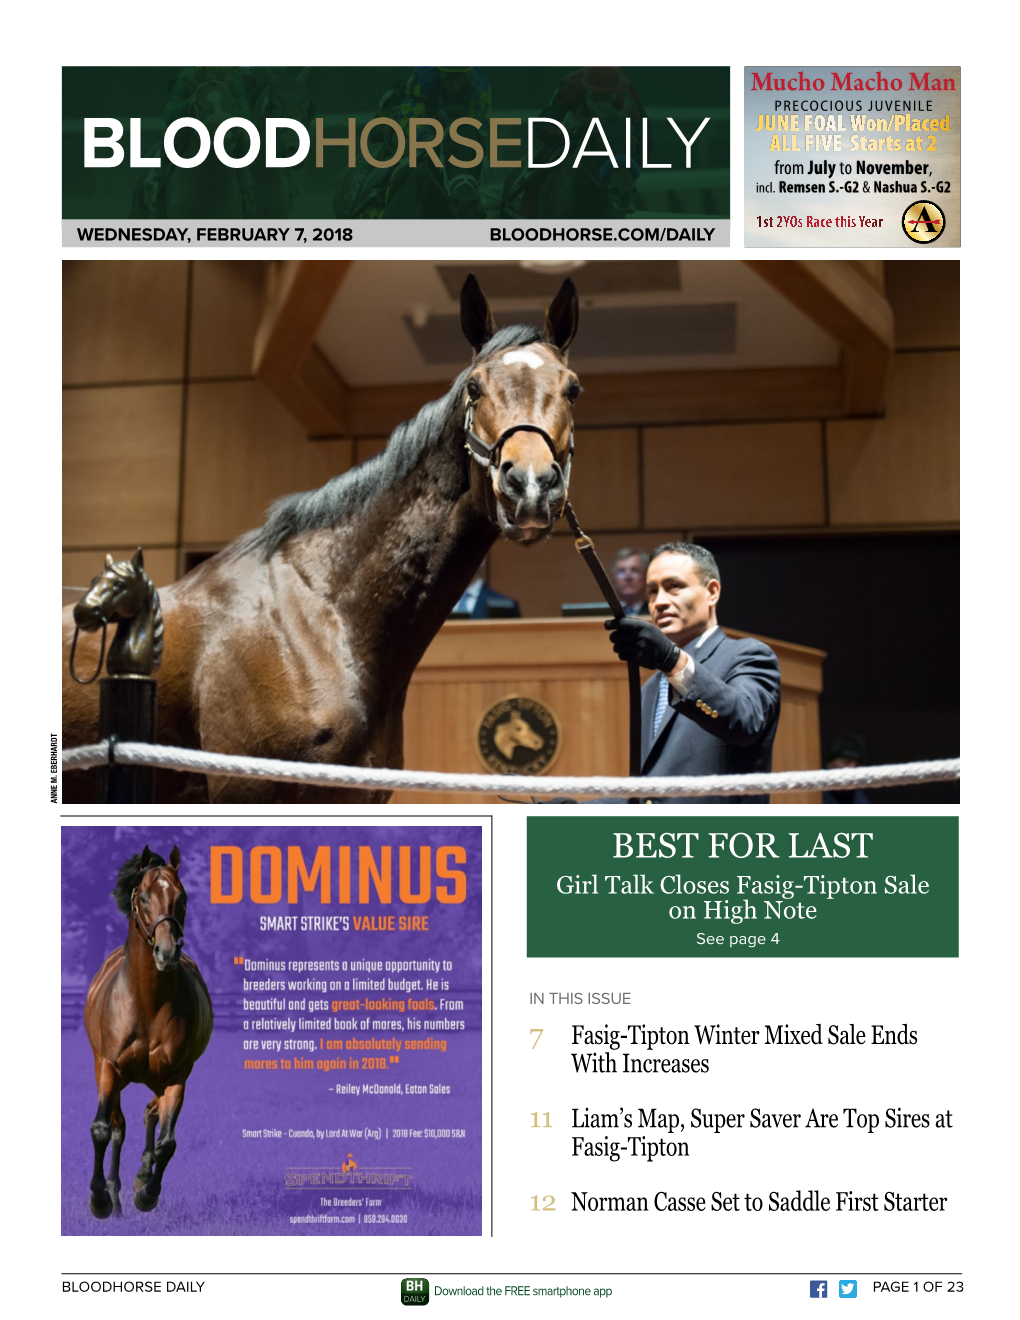 BEST for LAST Girl Talk Closes Fasig-Tipton Sale on High Note See Page 4